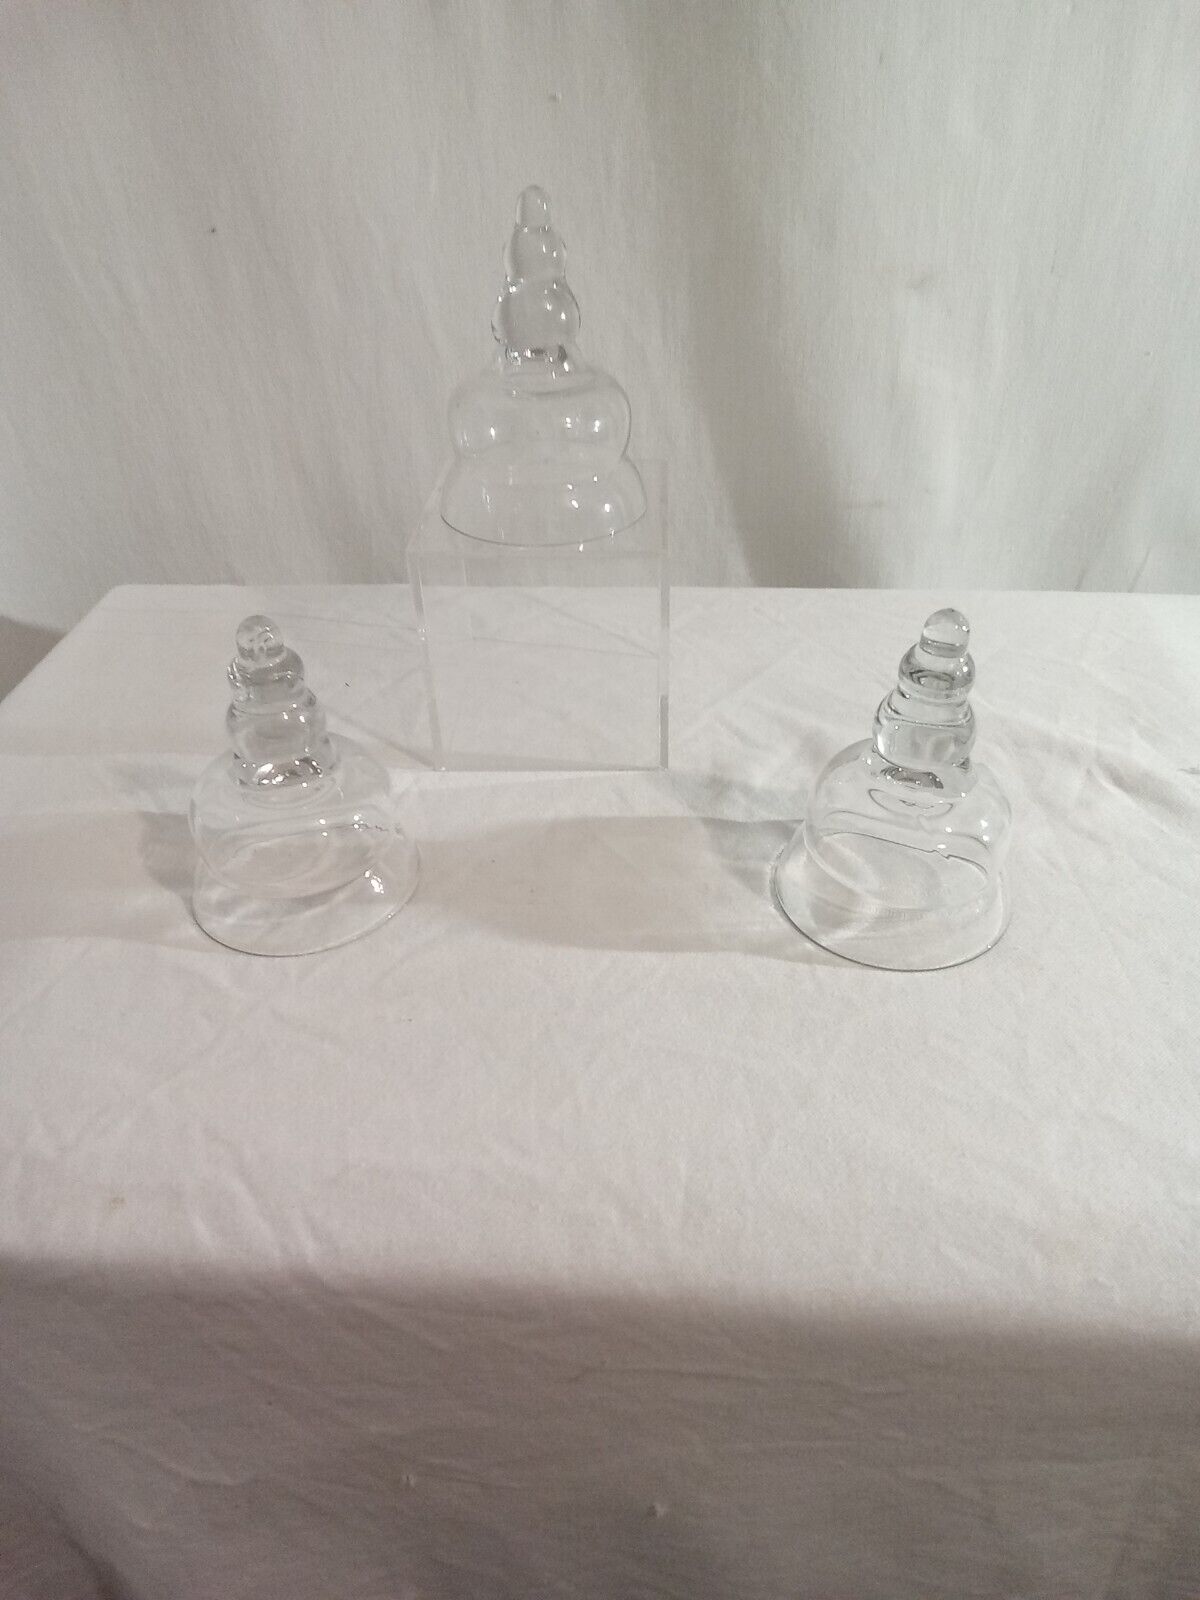 Antique 19th century hand blown glass Suction cup - Cupping glasses Set Of 3